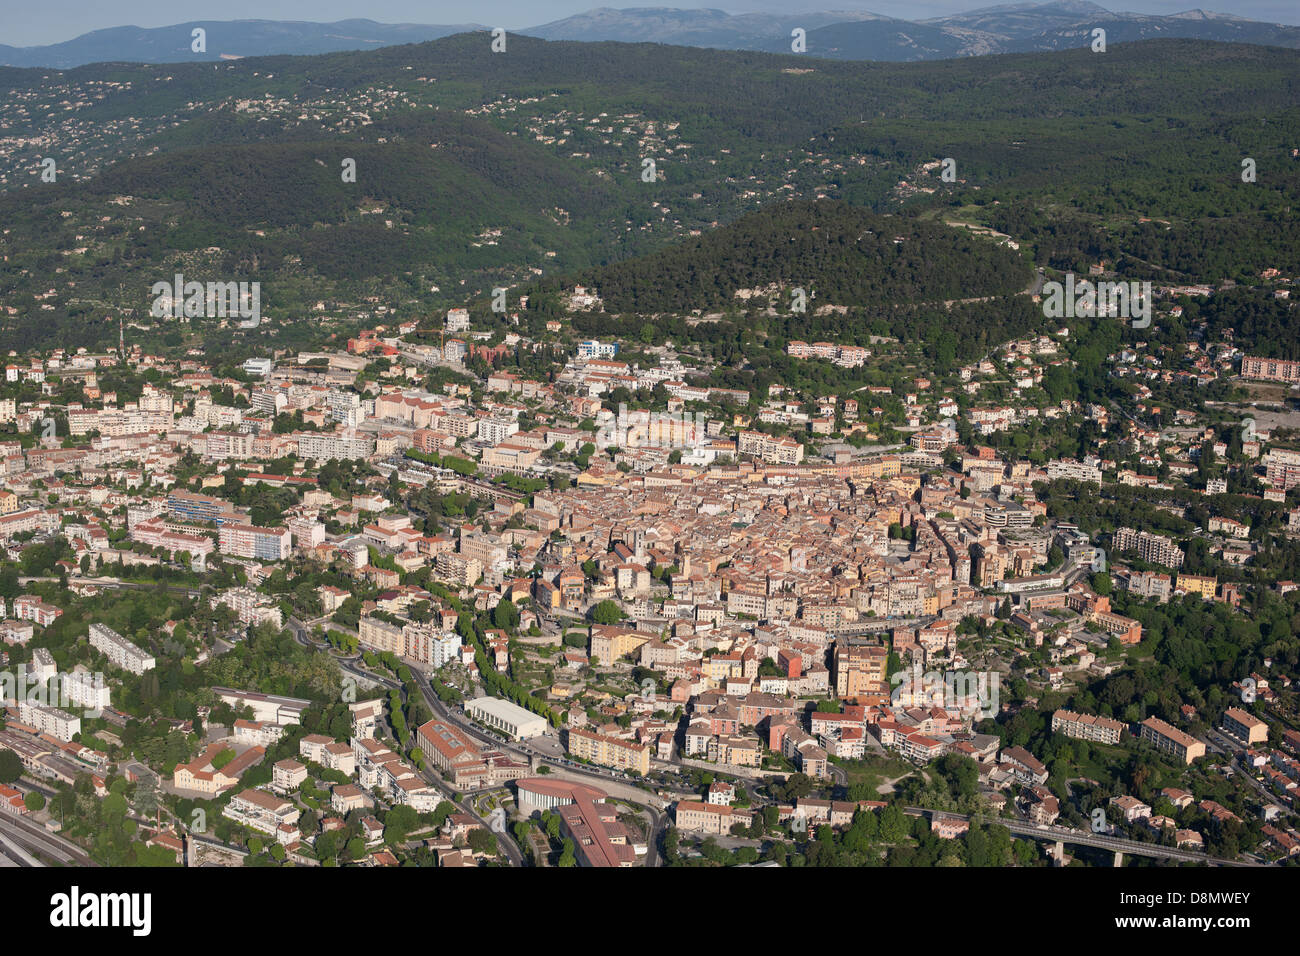 AERIAL VIEW. Hillside town of Grasse. French Riviera's backcountry, France. Stock Photo